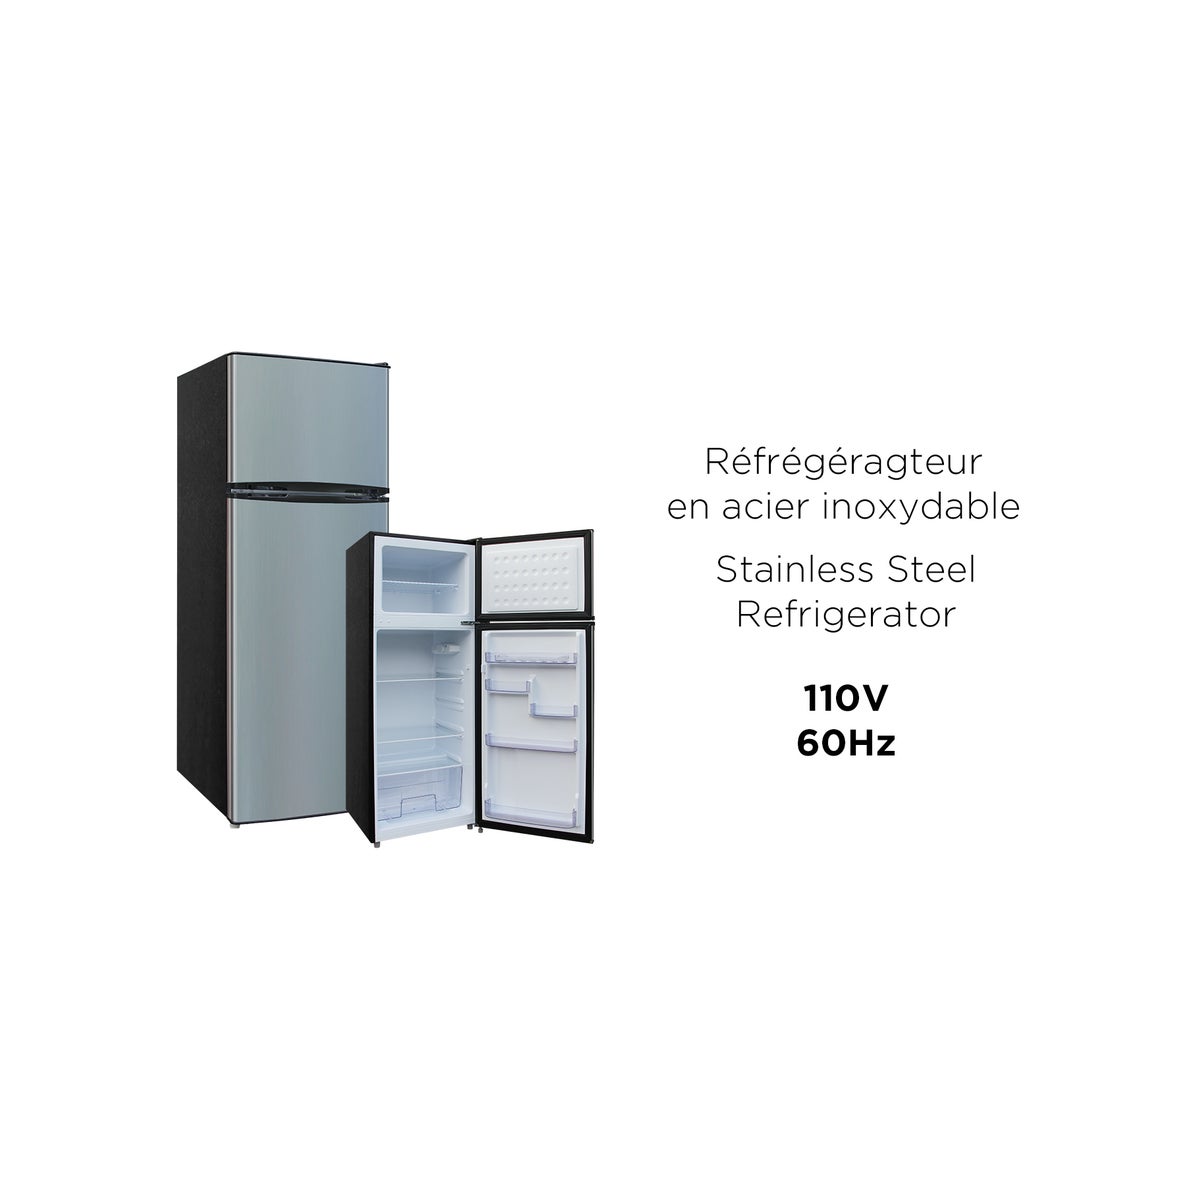 7.5 CU.FT REFRIGERATOR WITH FREEZER - BLACK AND STAINLESS ST - small  appliances